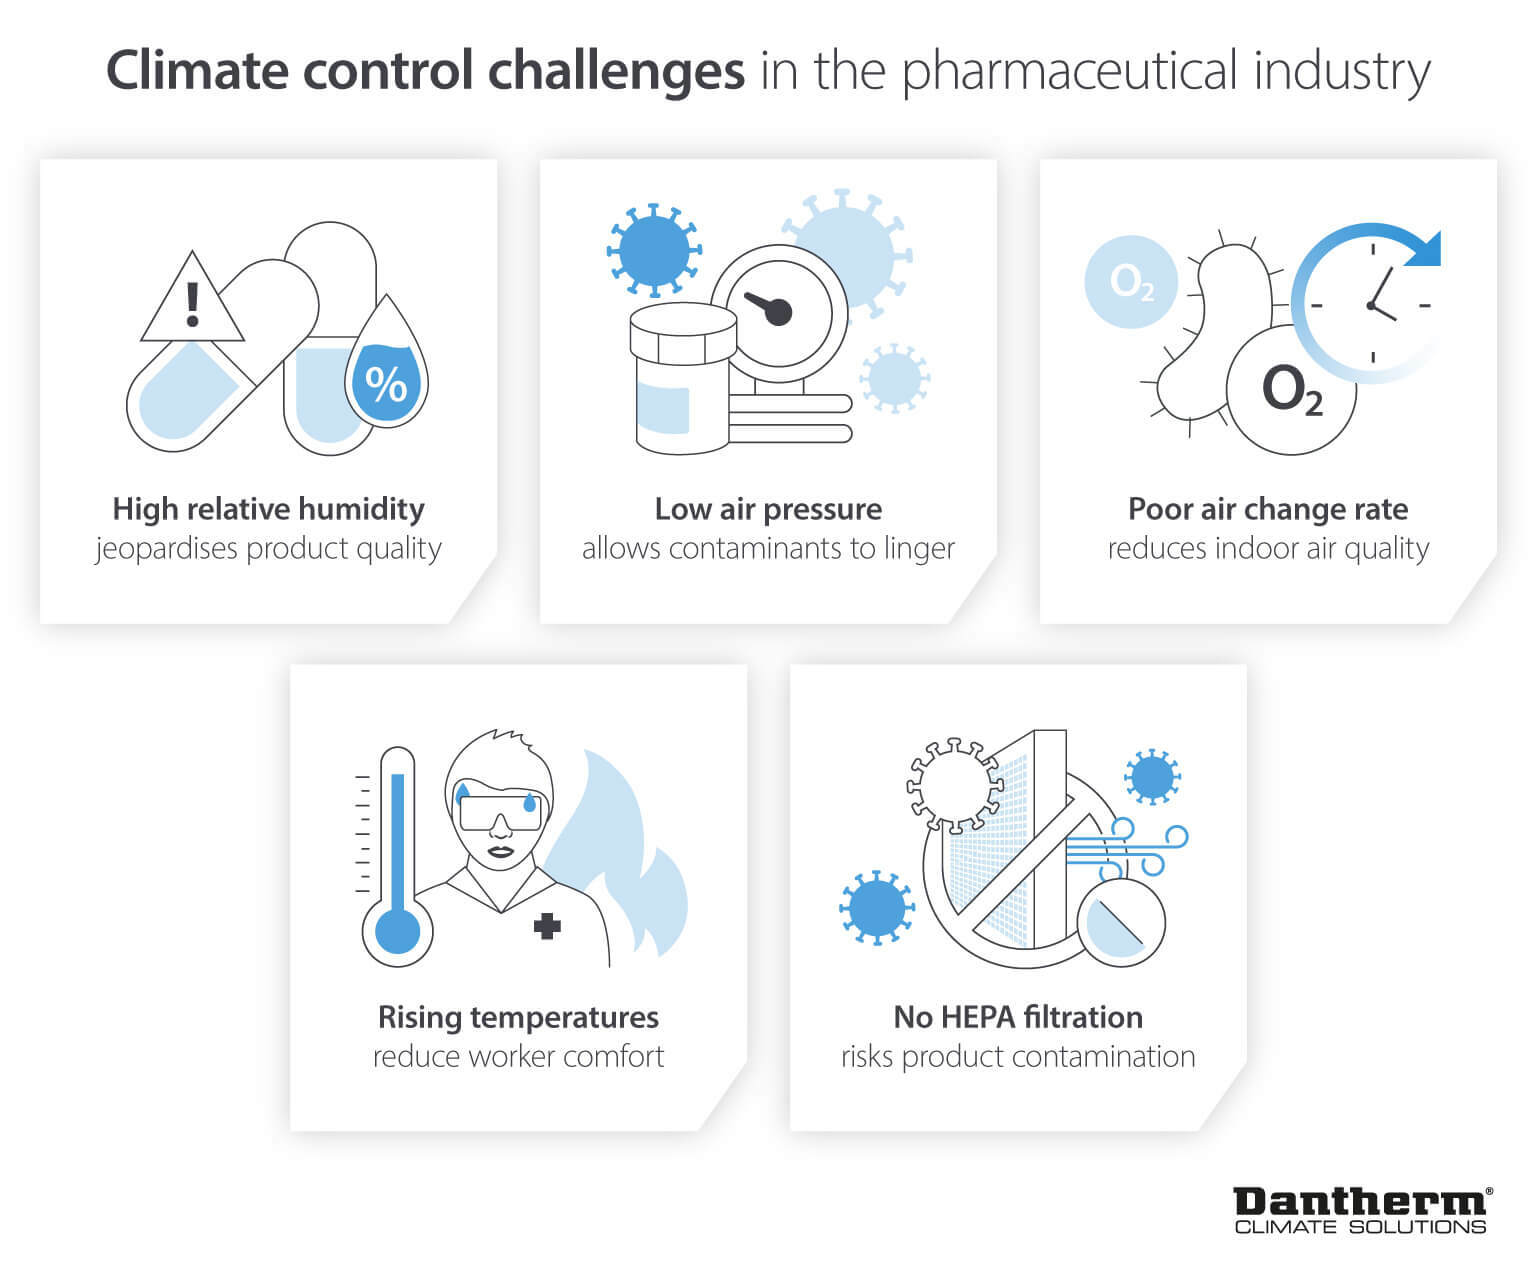 Pharmaceutical Air Handling and Climate Control challenges with temperature, humidity and filtration - Infographic image